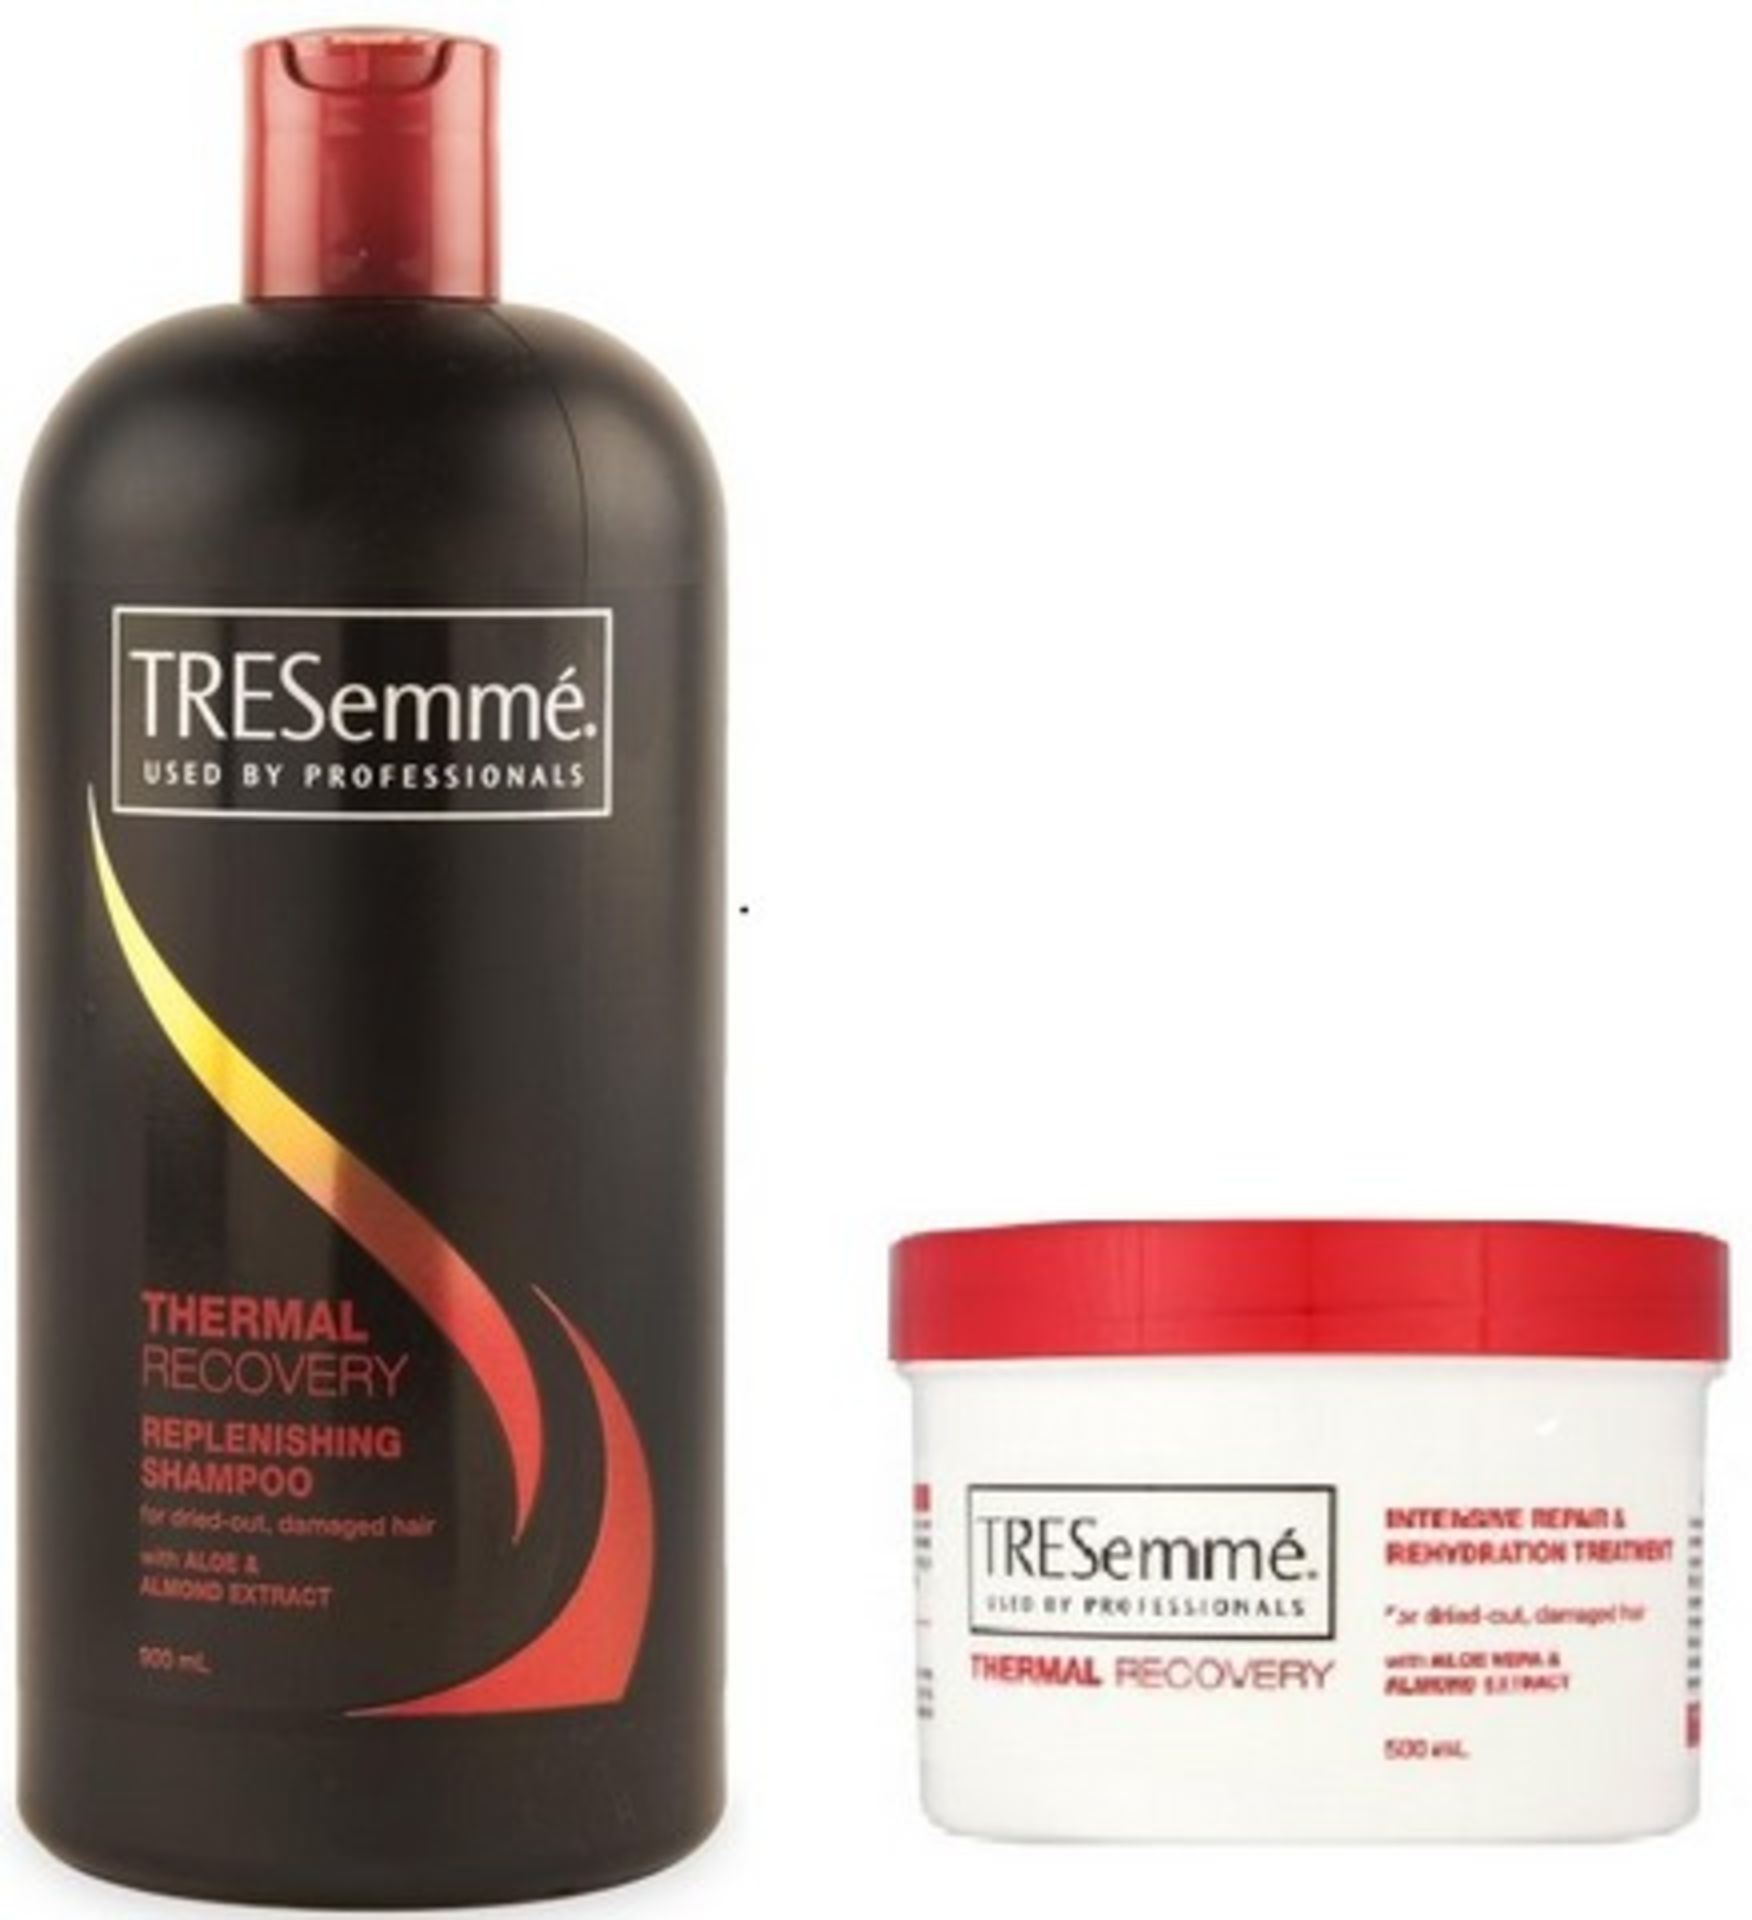 V Brand New 900ml Bottle TRESemme Thermal Recovery Shampoo & 500ml Tub Thermal Recovery Hair Mask